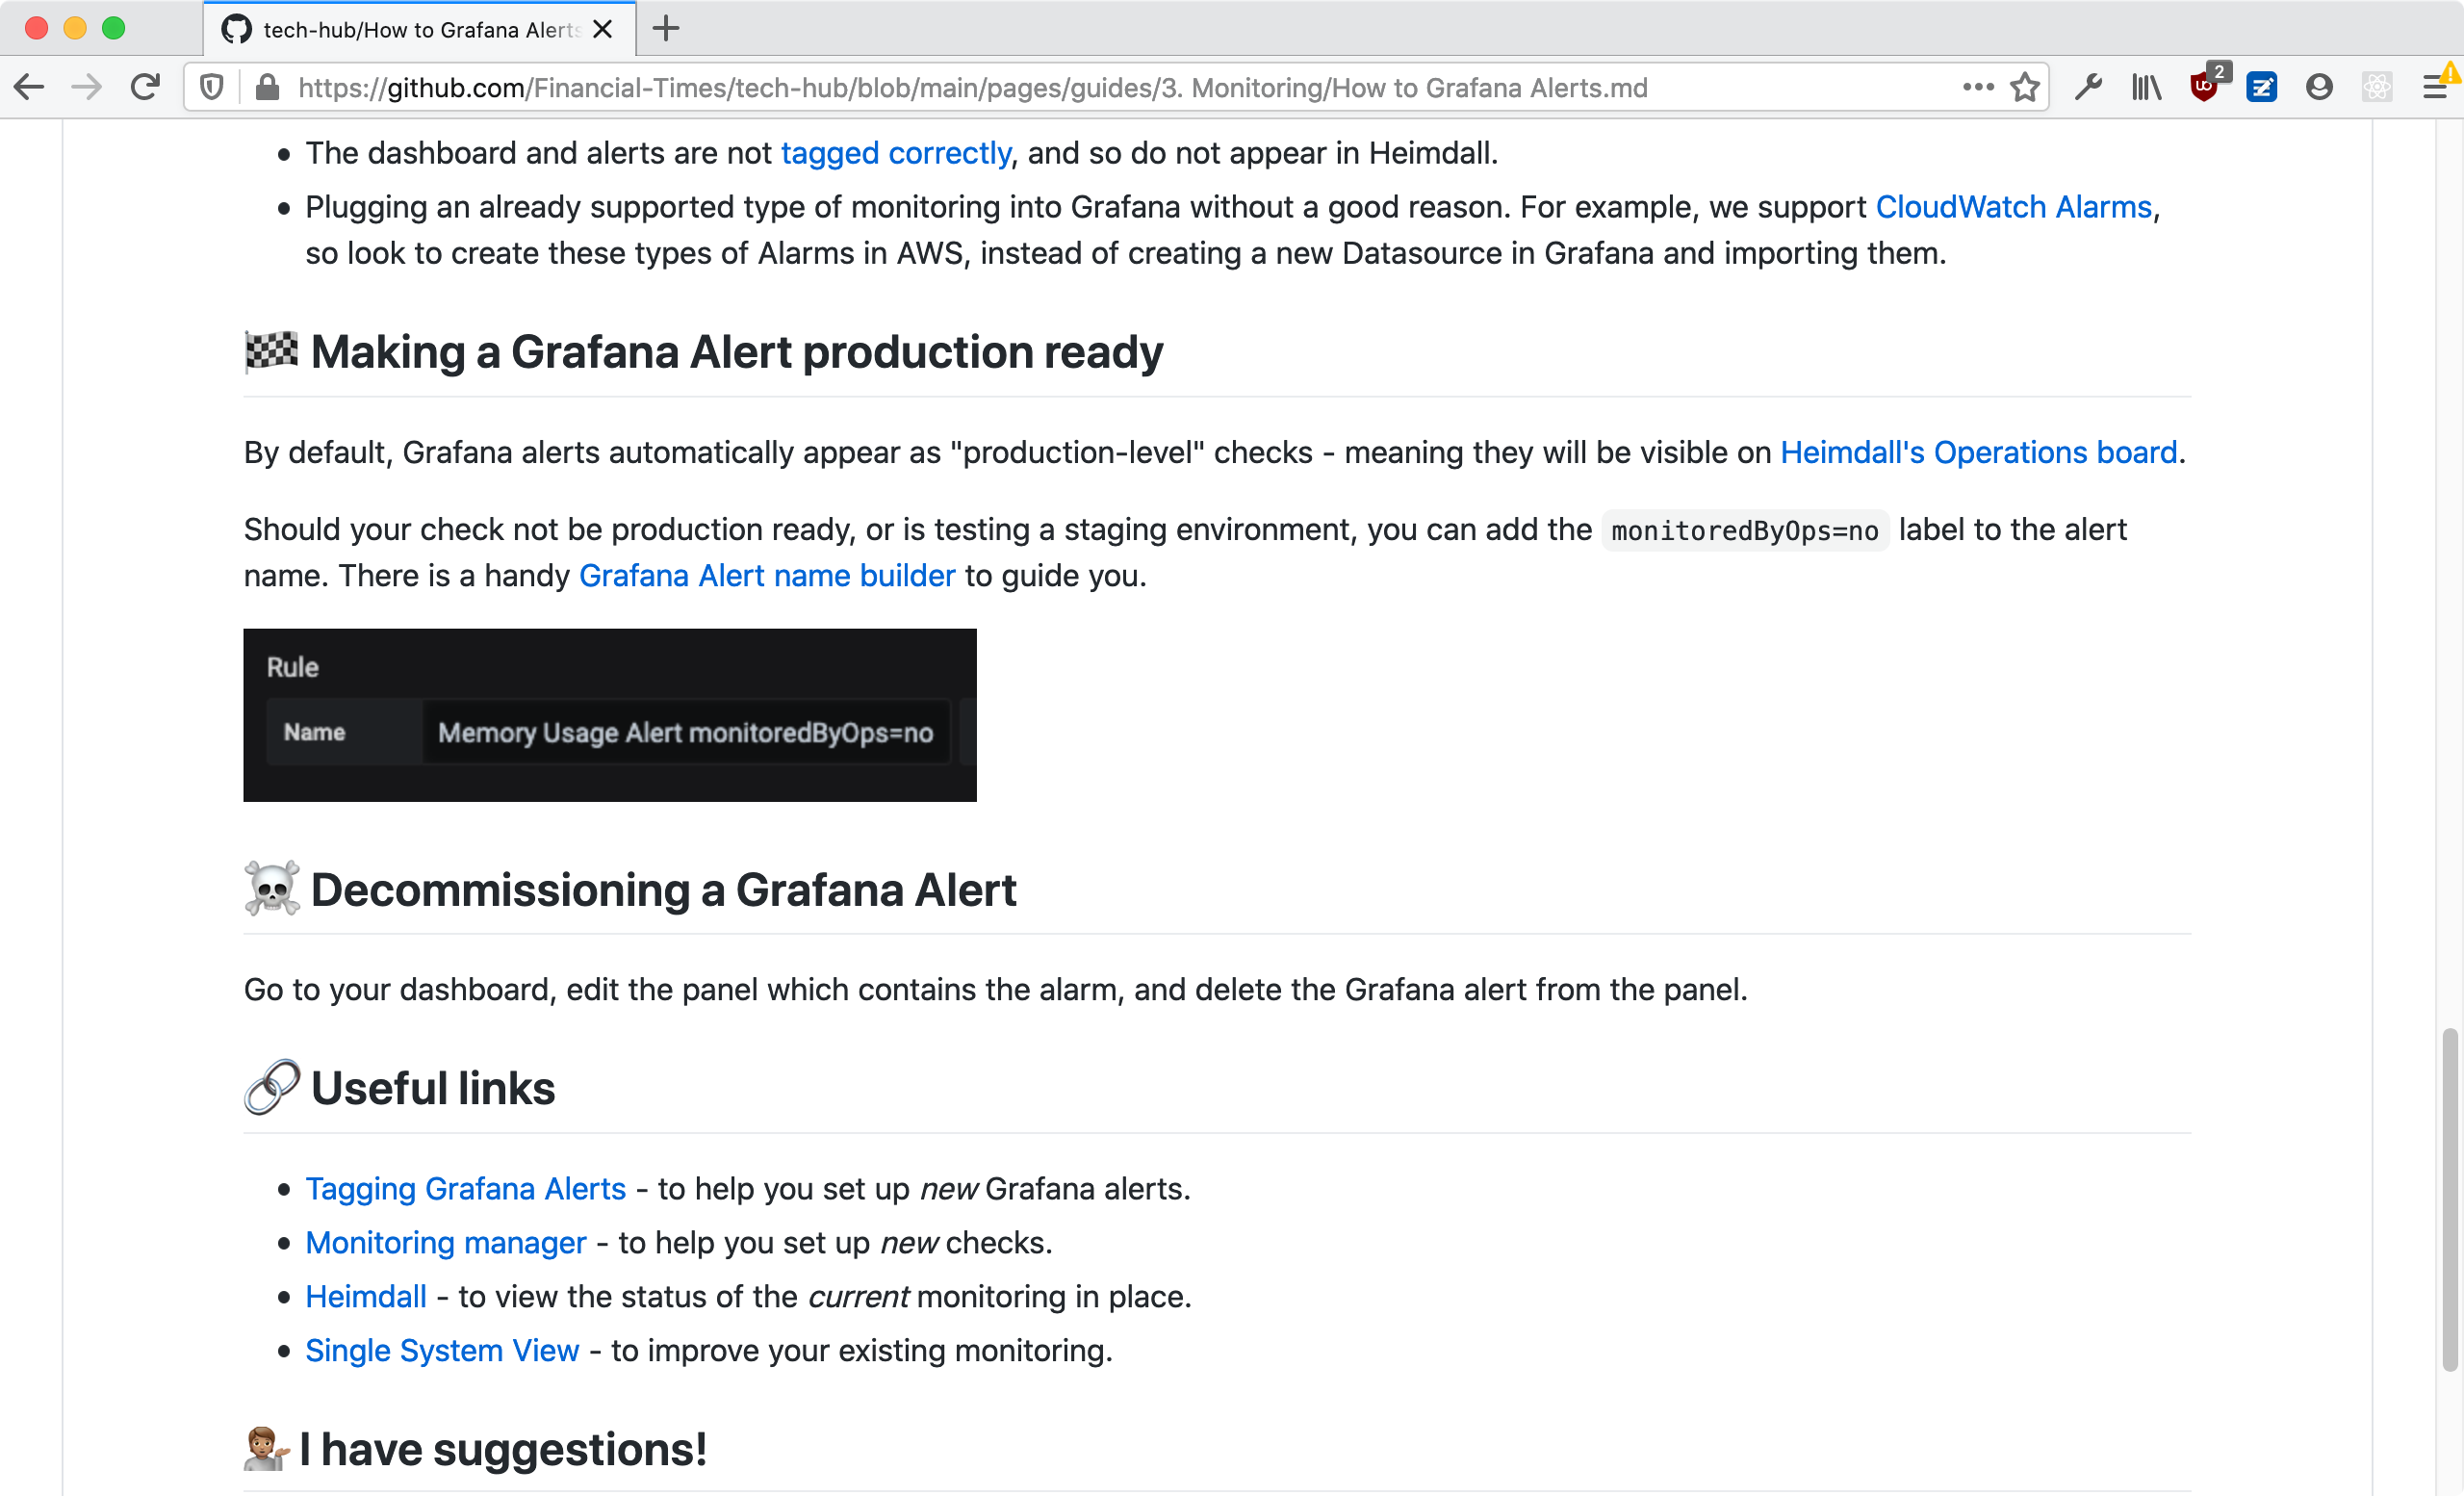 A page viewed on GitHub